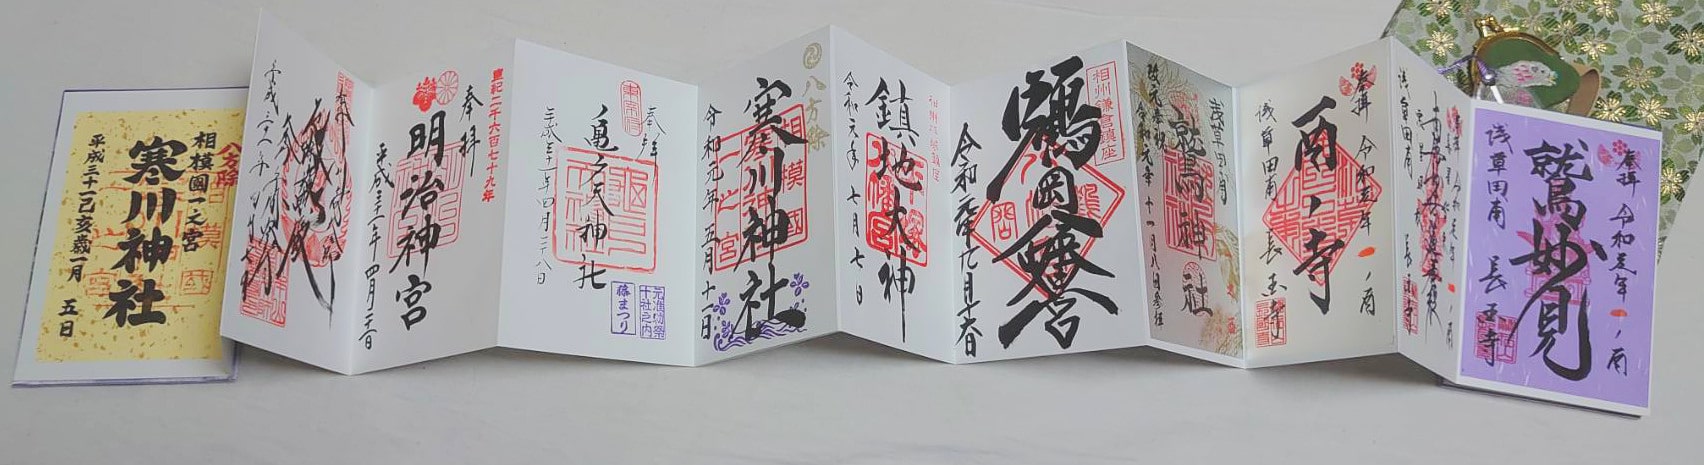 064 Goshuincho Stamp Book  For Collecting Stamps from Temples